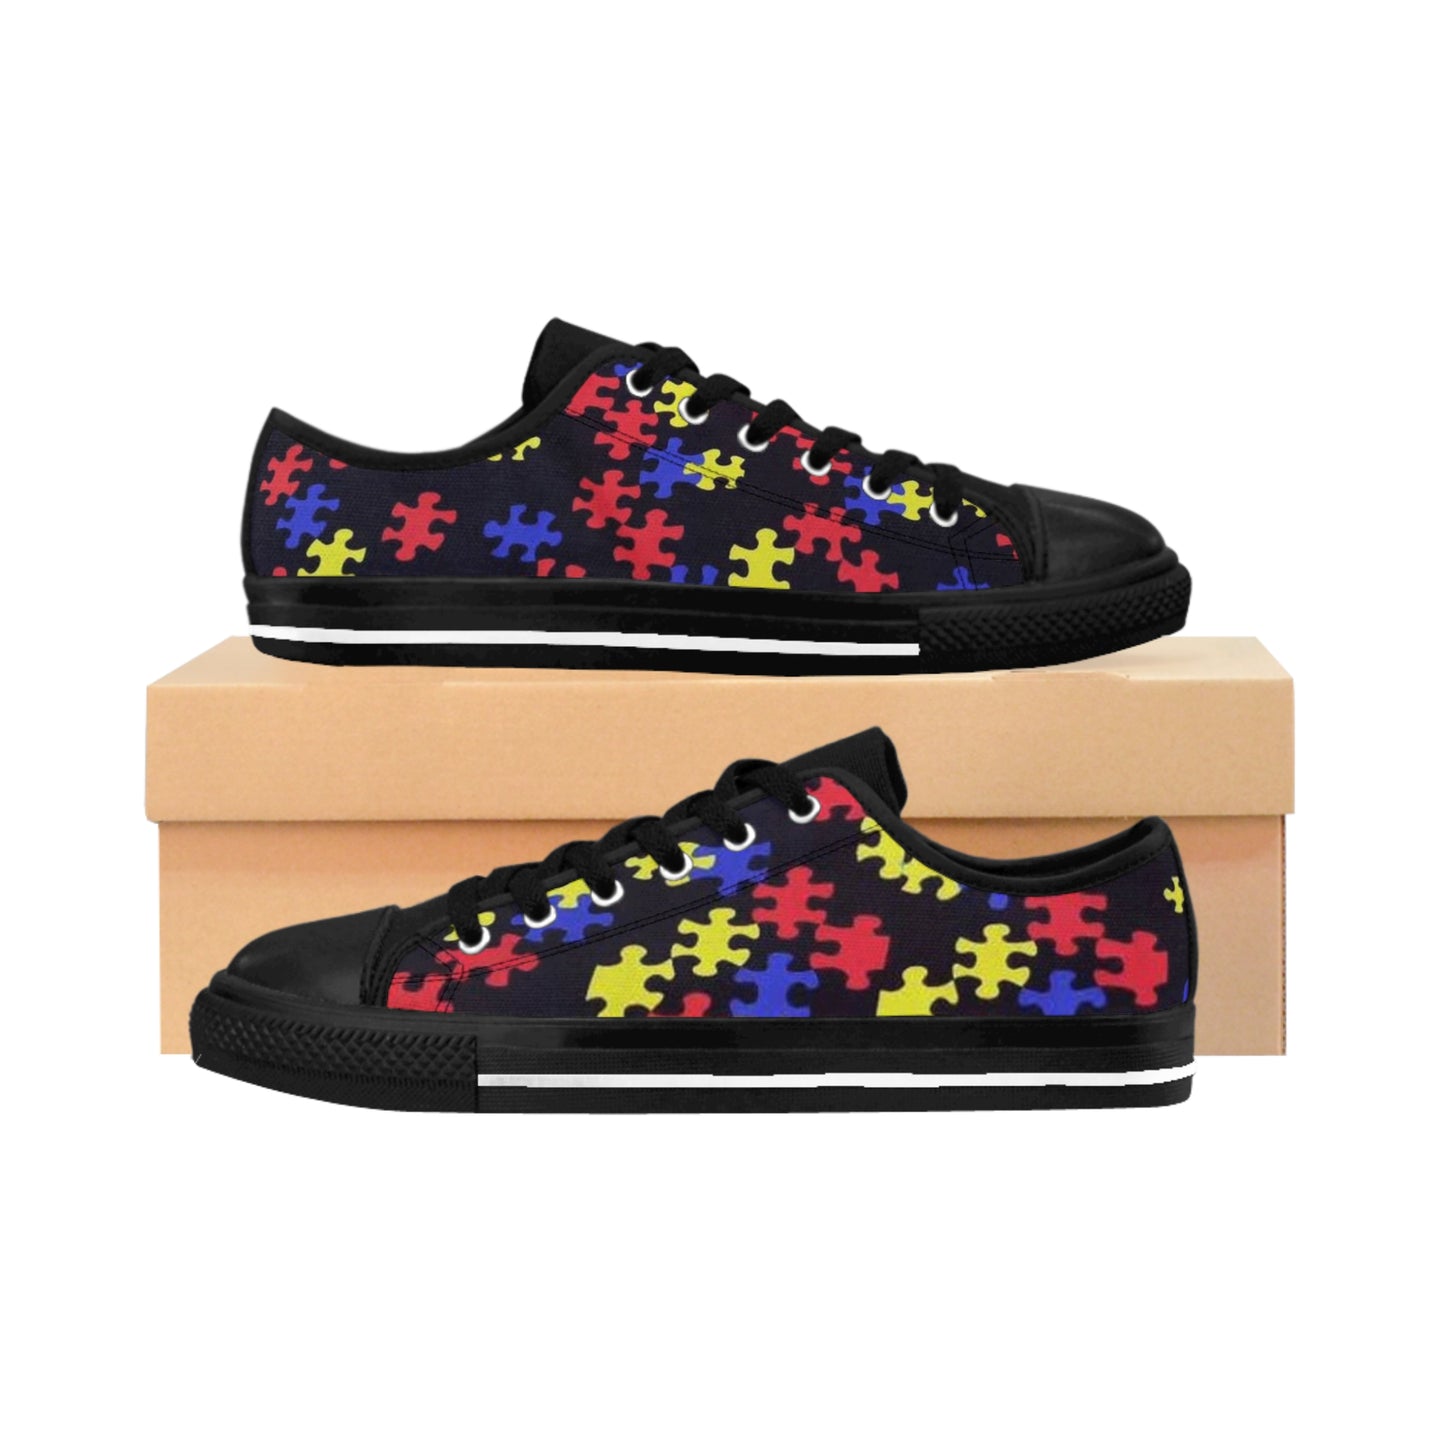 Classic Puzzle Piece Women's Sneakers